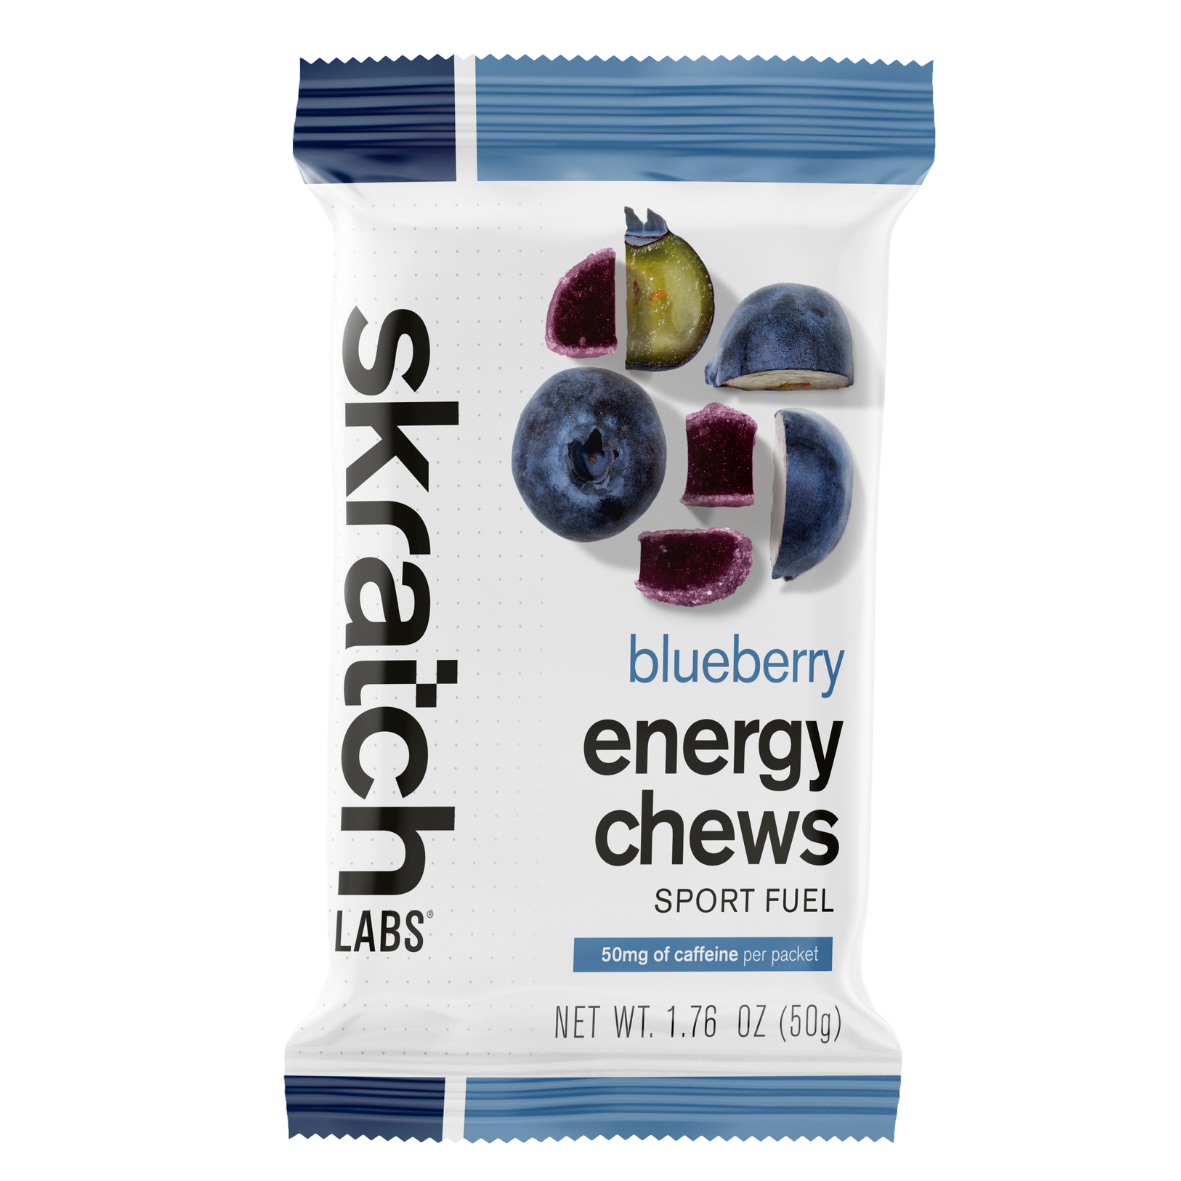 Skratch Labs Sport Energy Chews in Blueberry flavour (with caffeine)